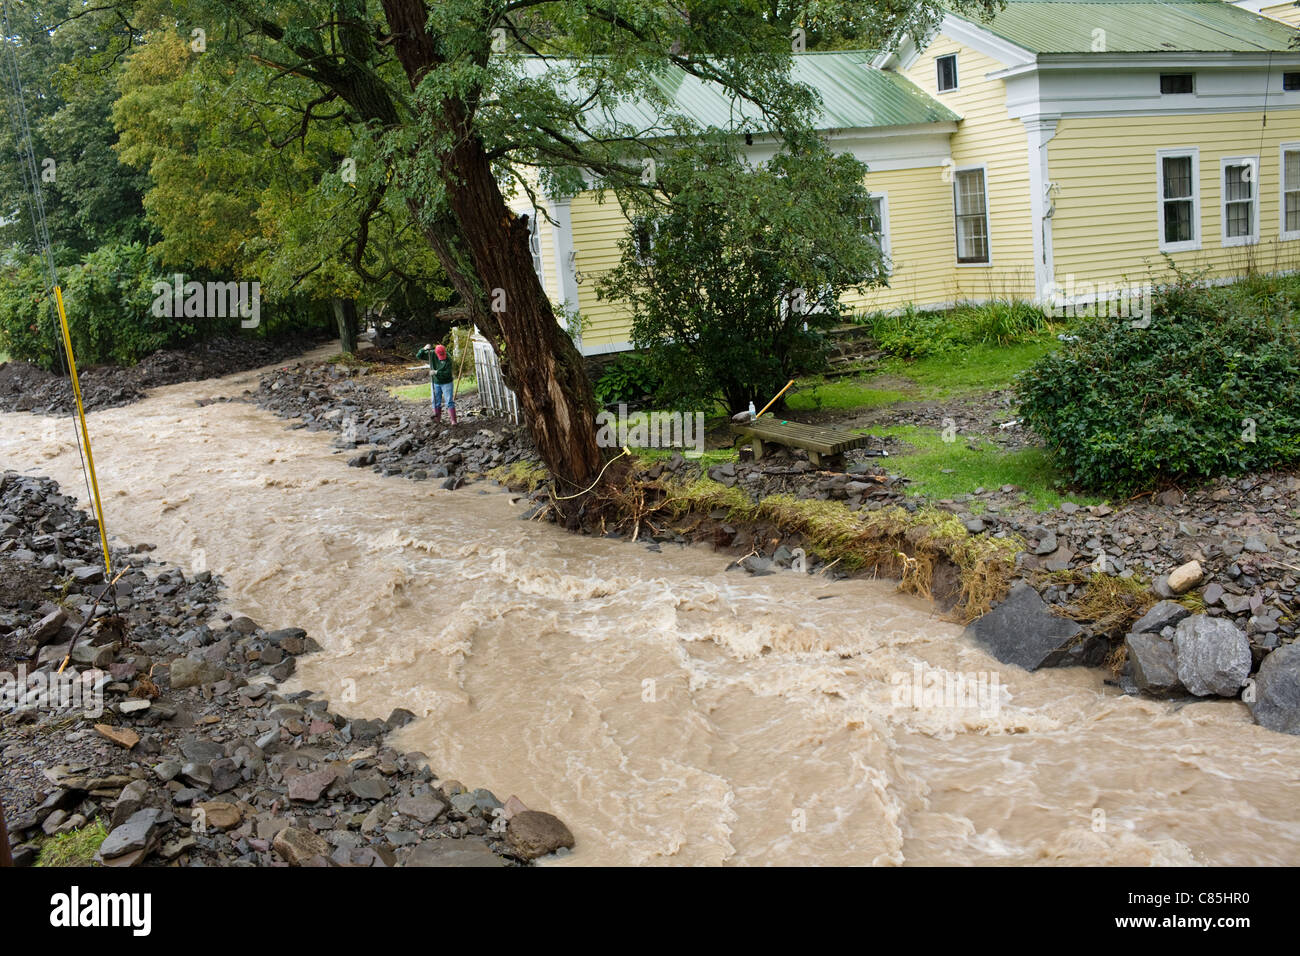 Homeowner fights floodwaters of a raging creek, September 2011, Schoharie Valley, New York State Stock Photo